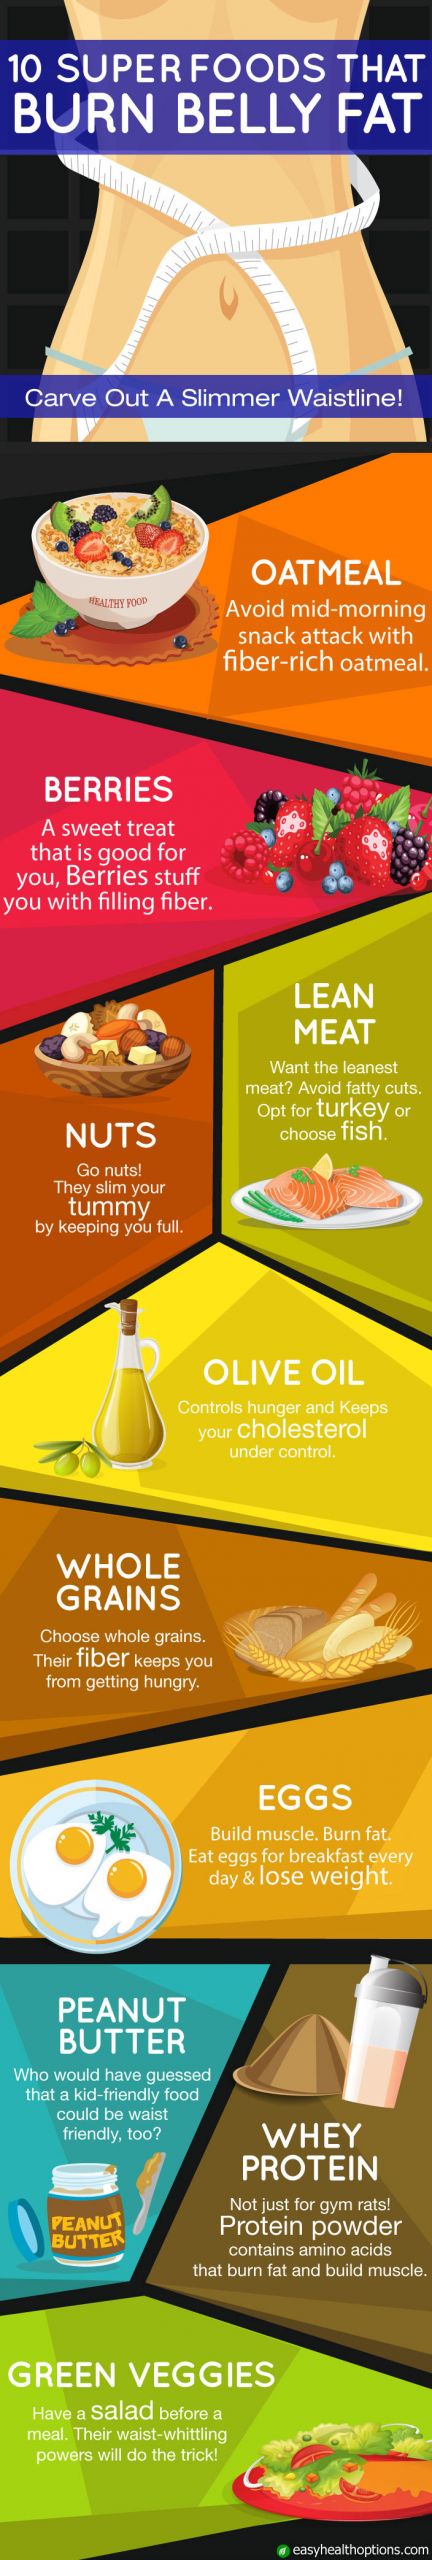 Foods That Help Burn Belly Fat
 10 Superfoods that burn belly fat infographic Easy